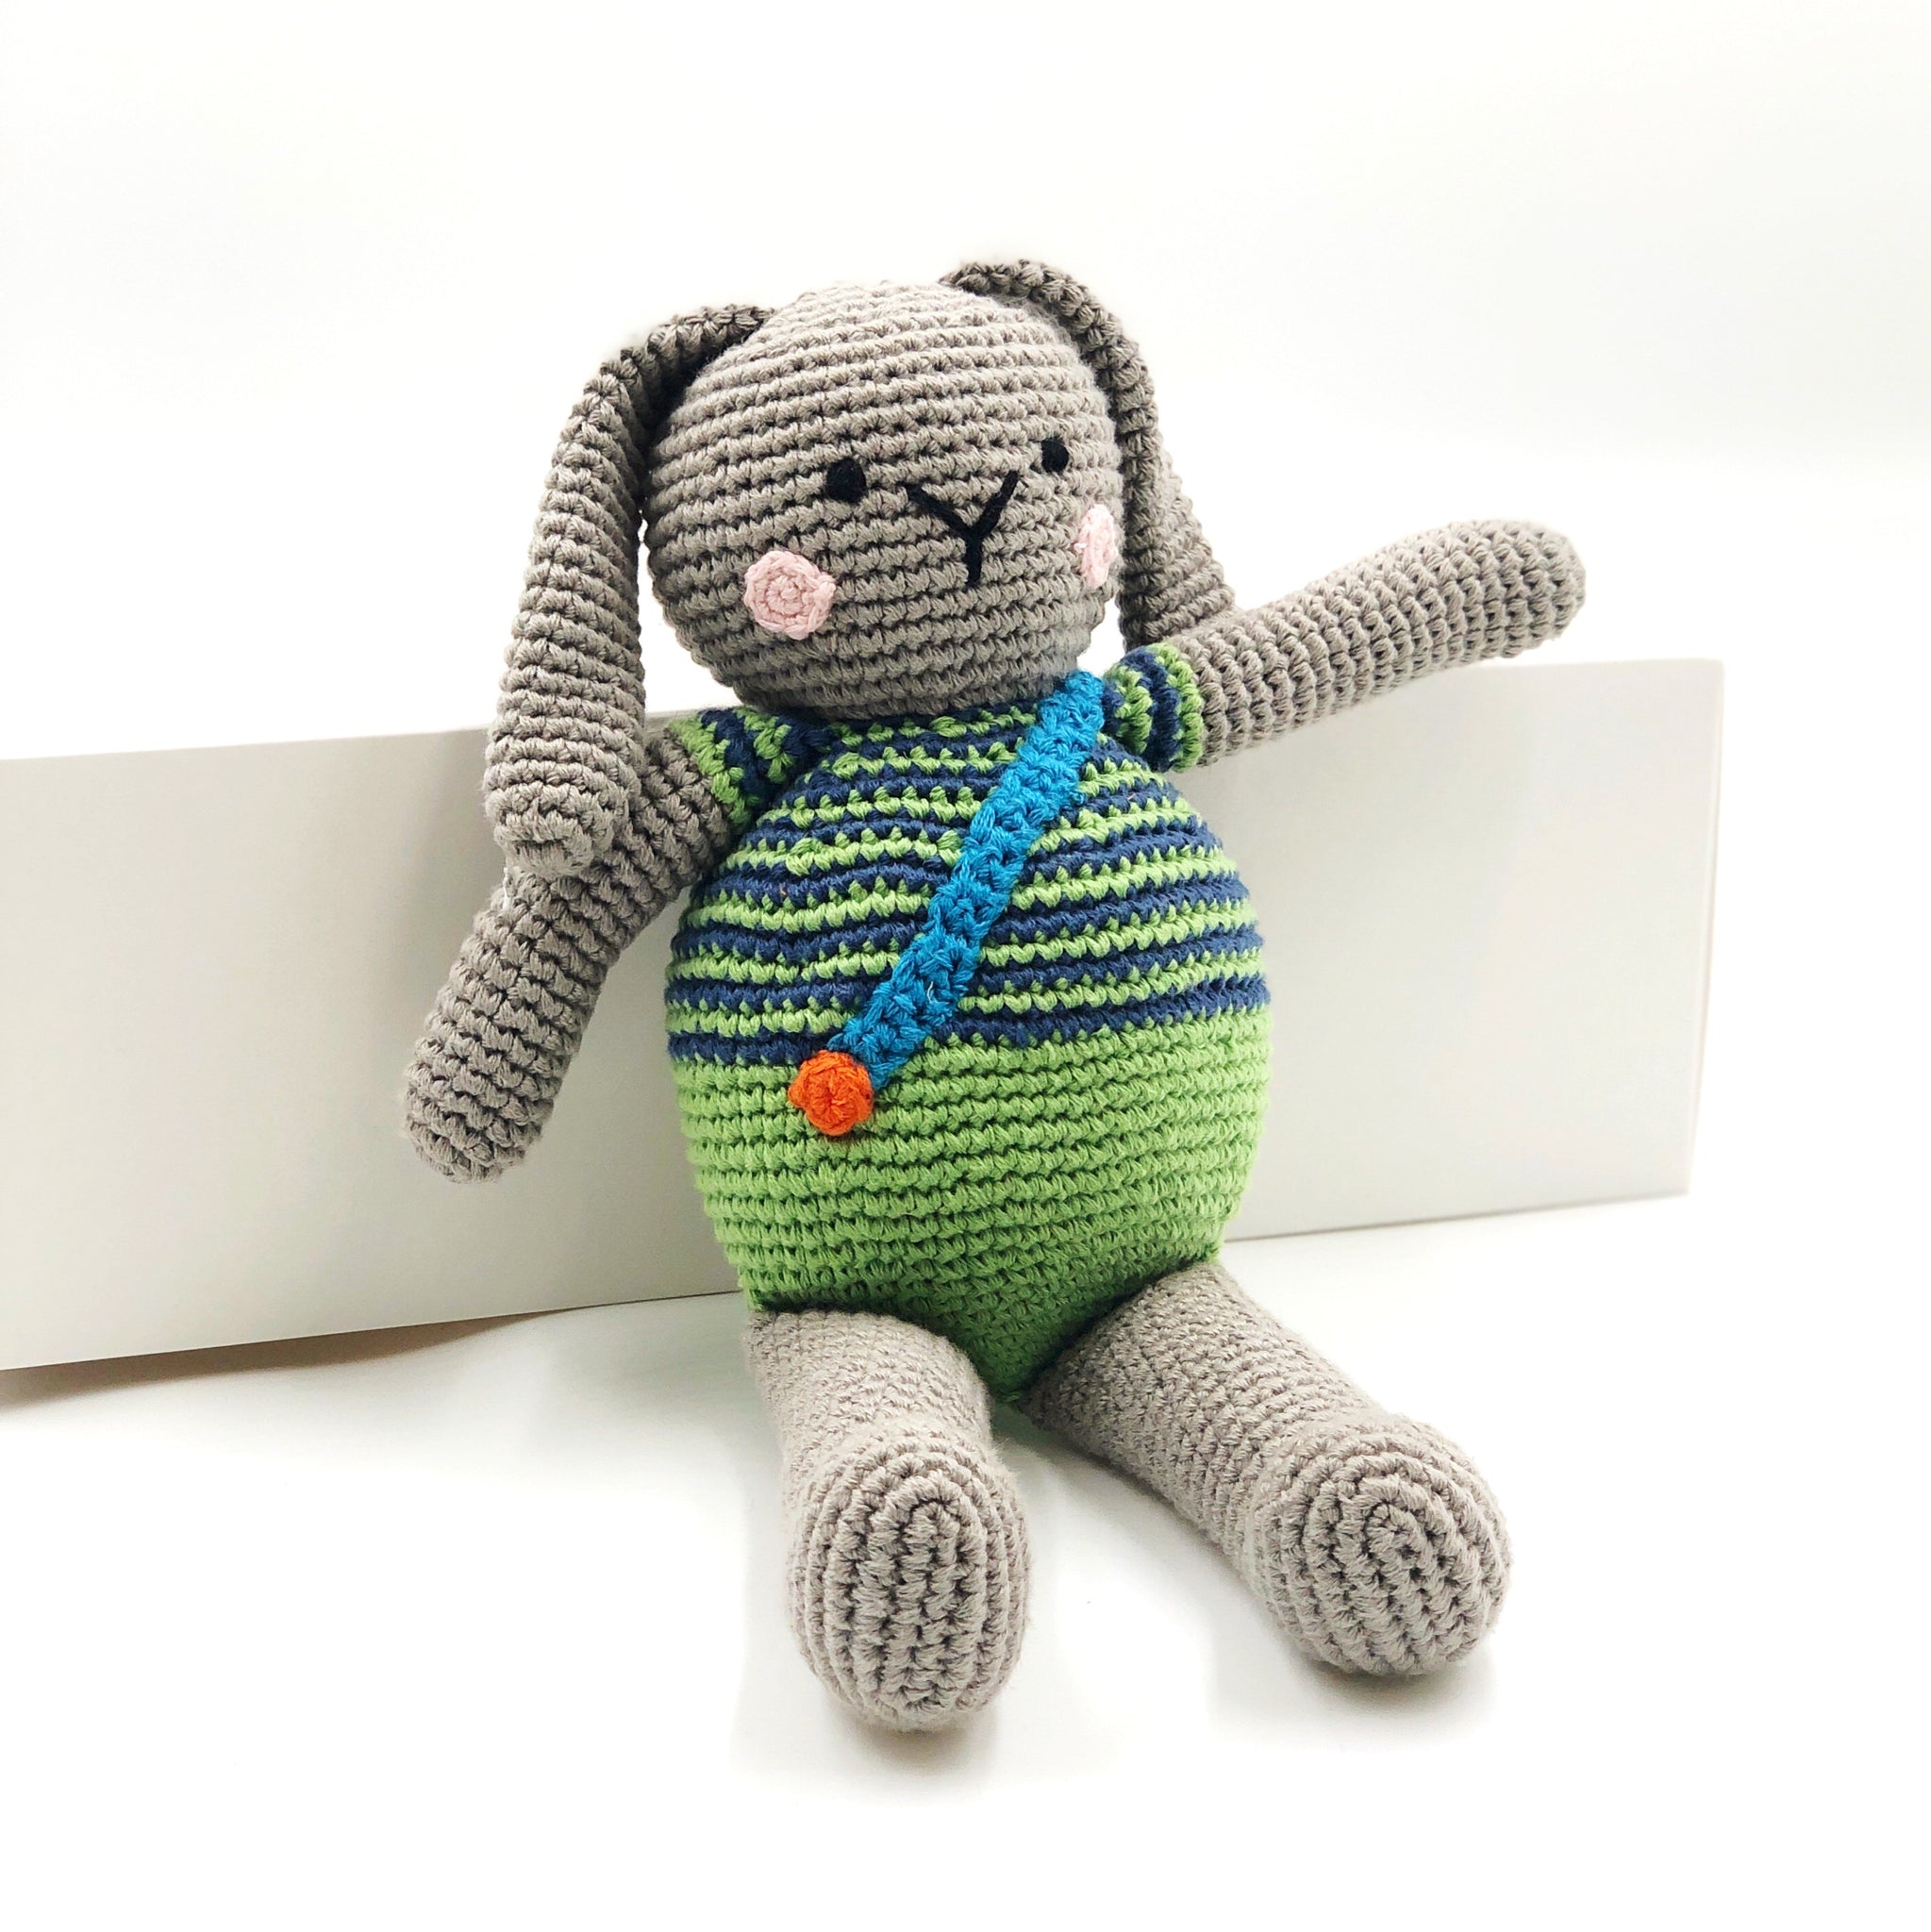 Crochet Grey Plush Bunny Toy with blue and green shirt.